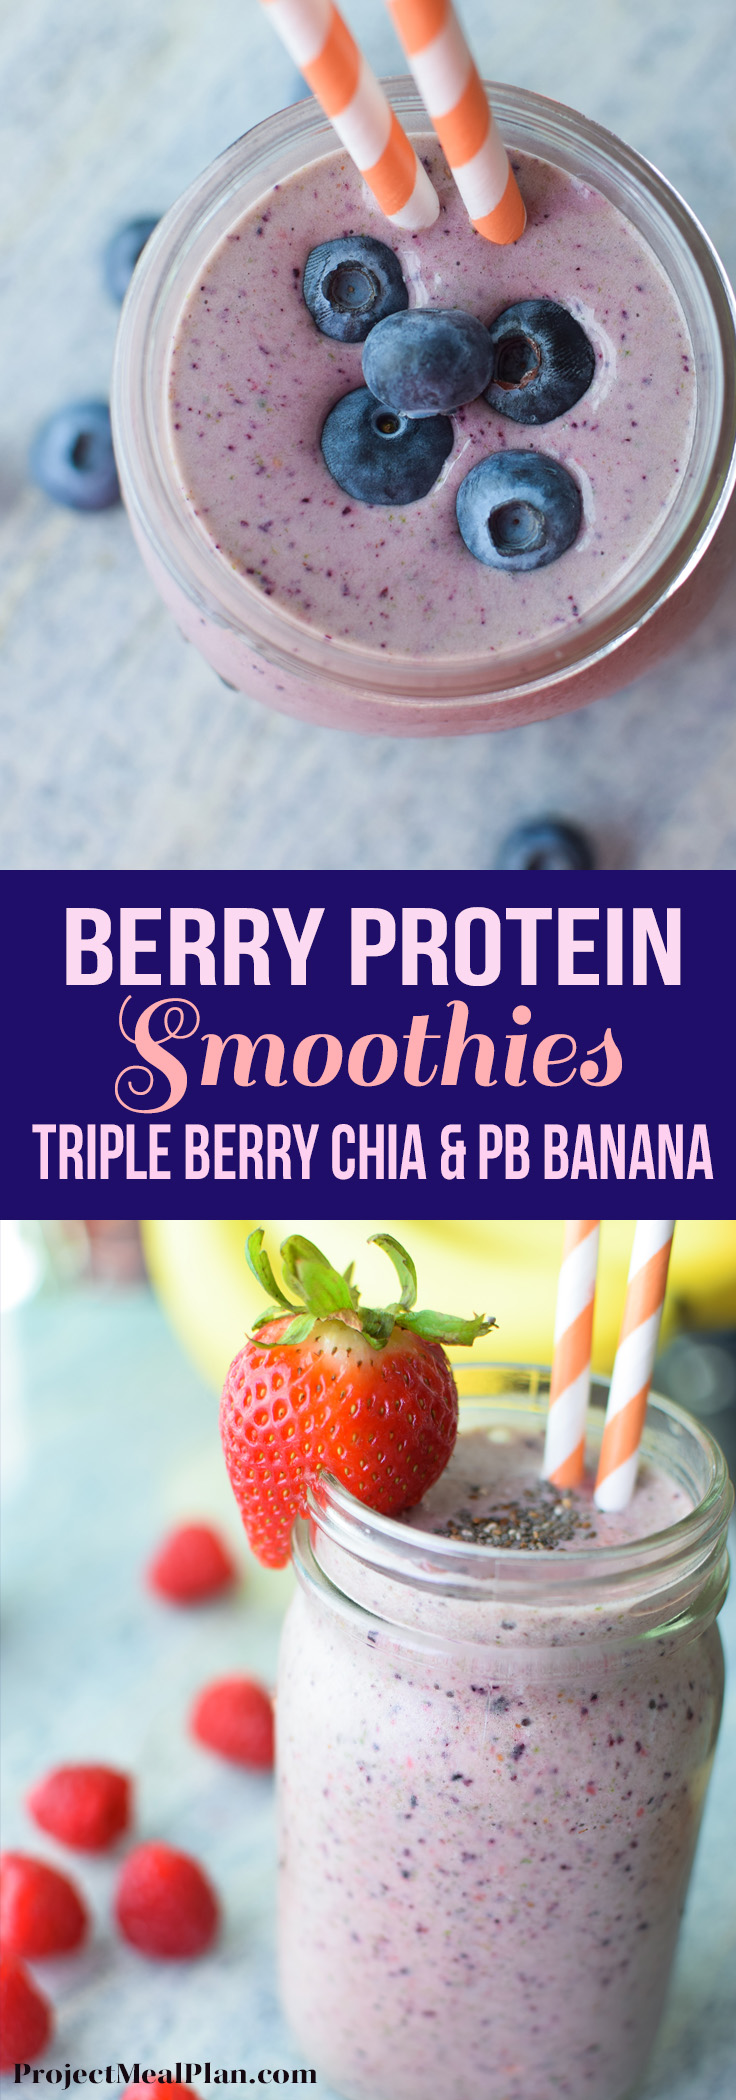 Berry Protein Smoothies Two Ways - Recipes for triple berry chia and PB banana smoothies! yummy & protein filled :) - ProjectMealPlan.com